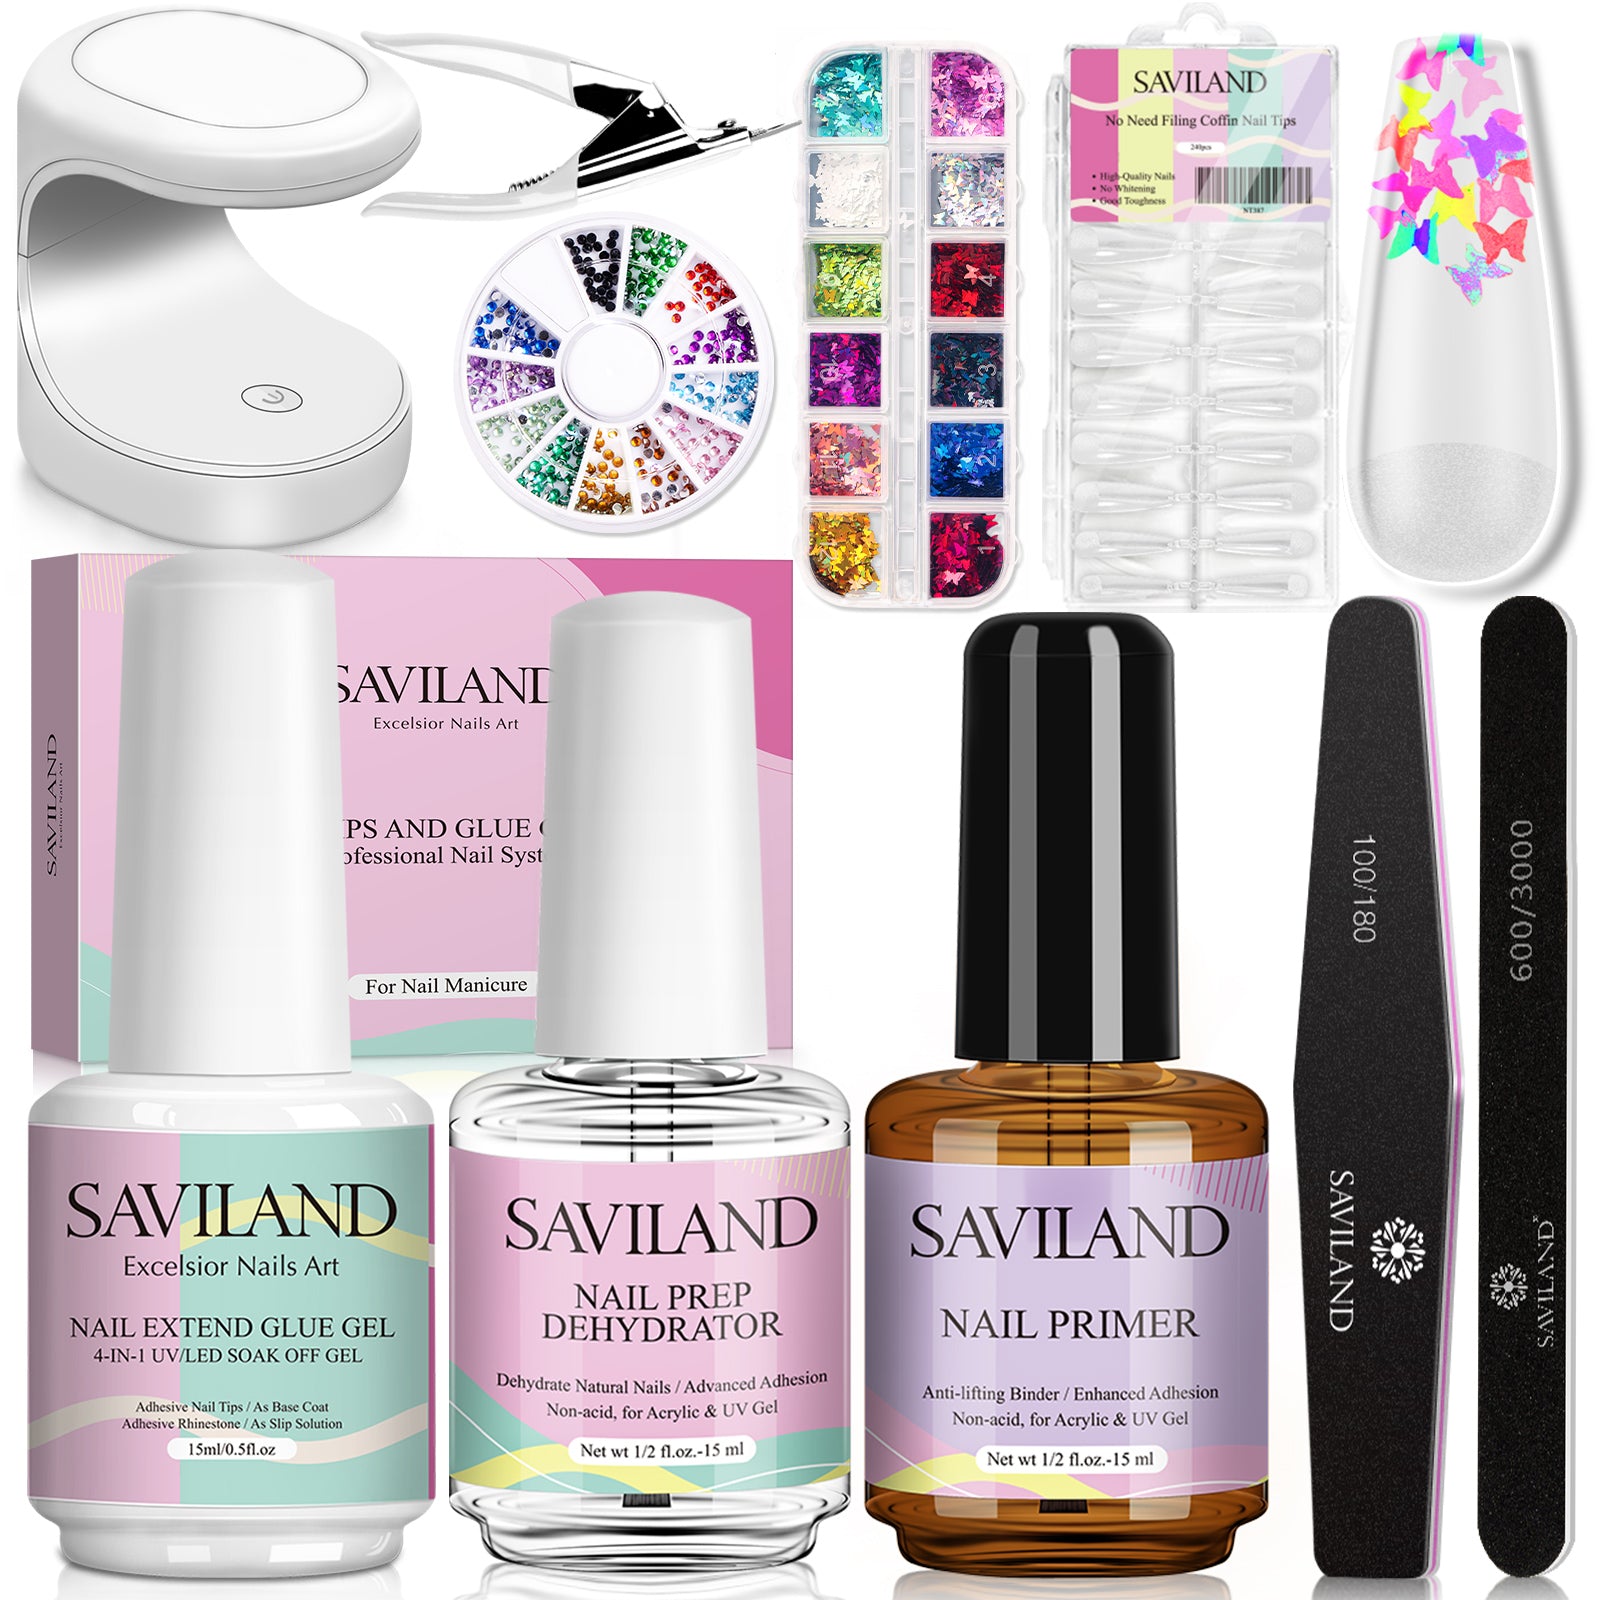 [US ONLY]Nail Tips and 4-In-1 Nail Glue Gel Kit